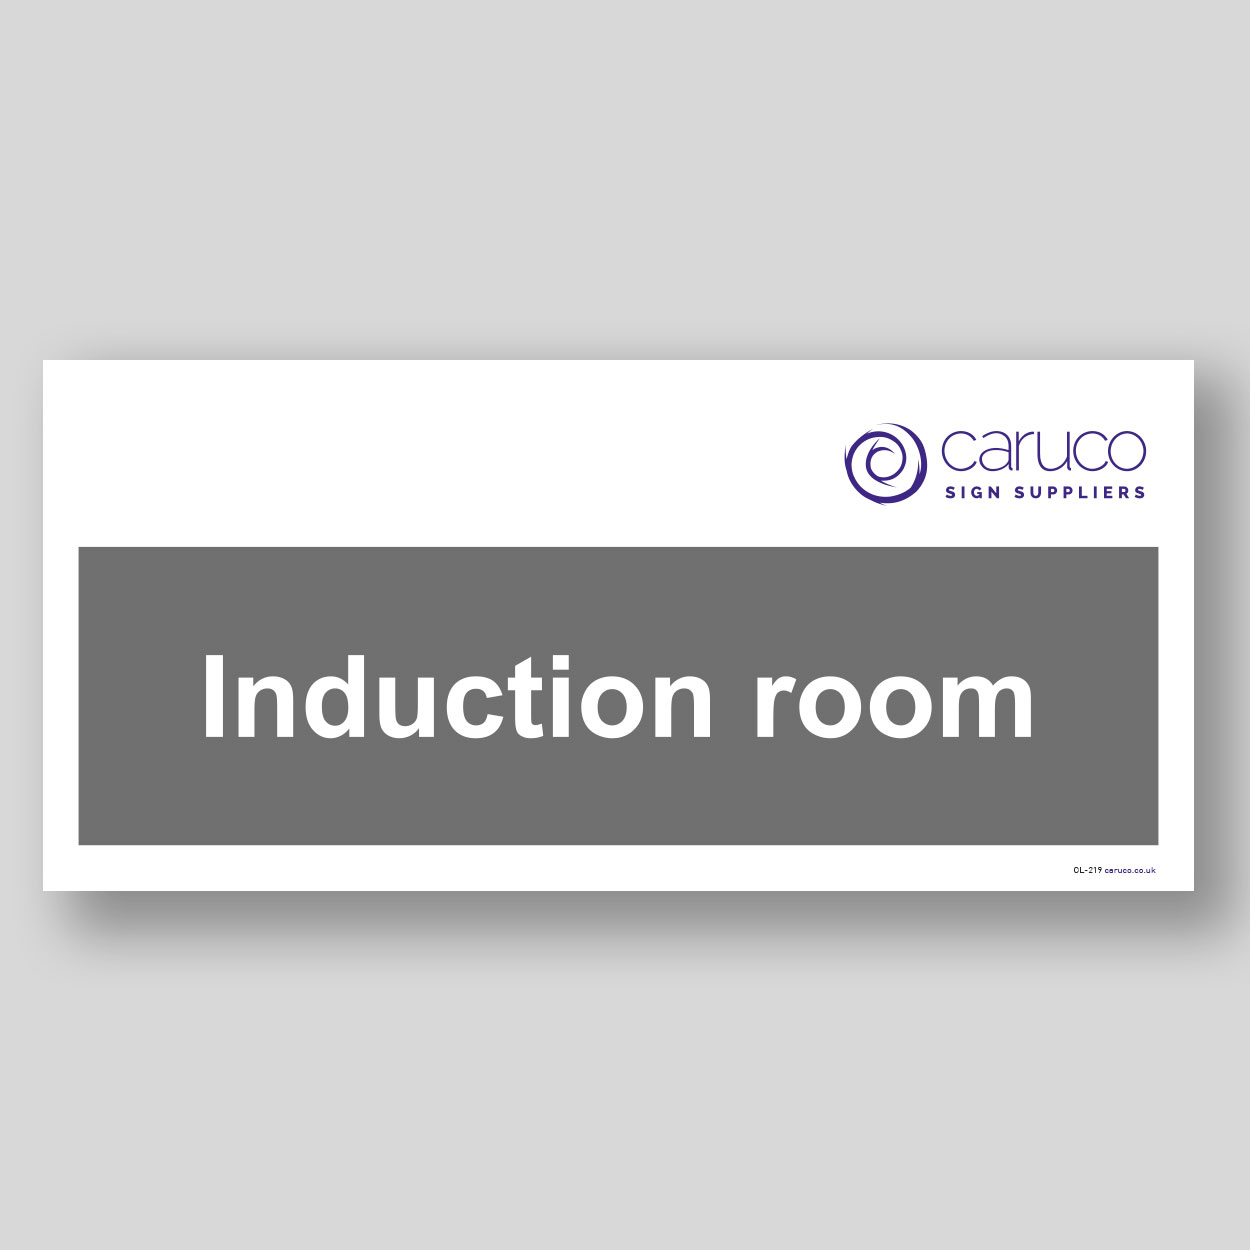 CL-219 Induction room